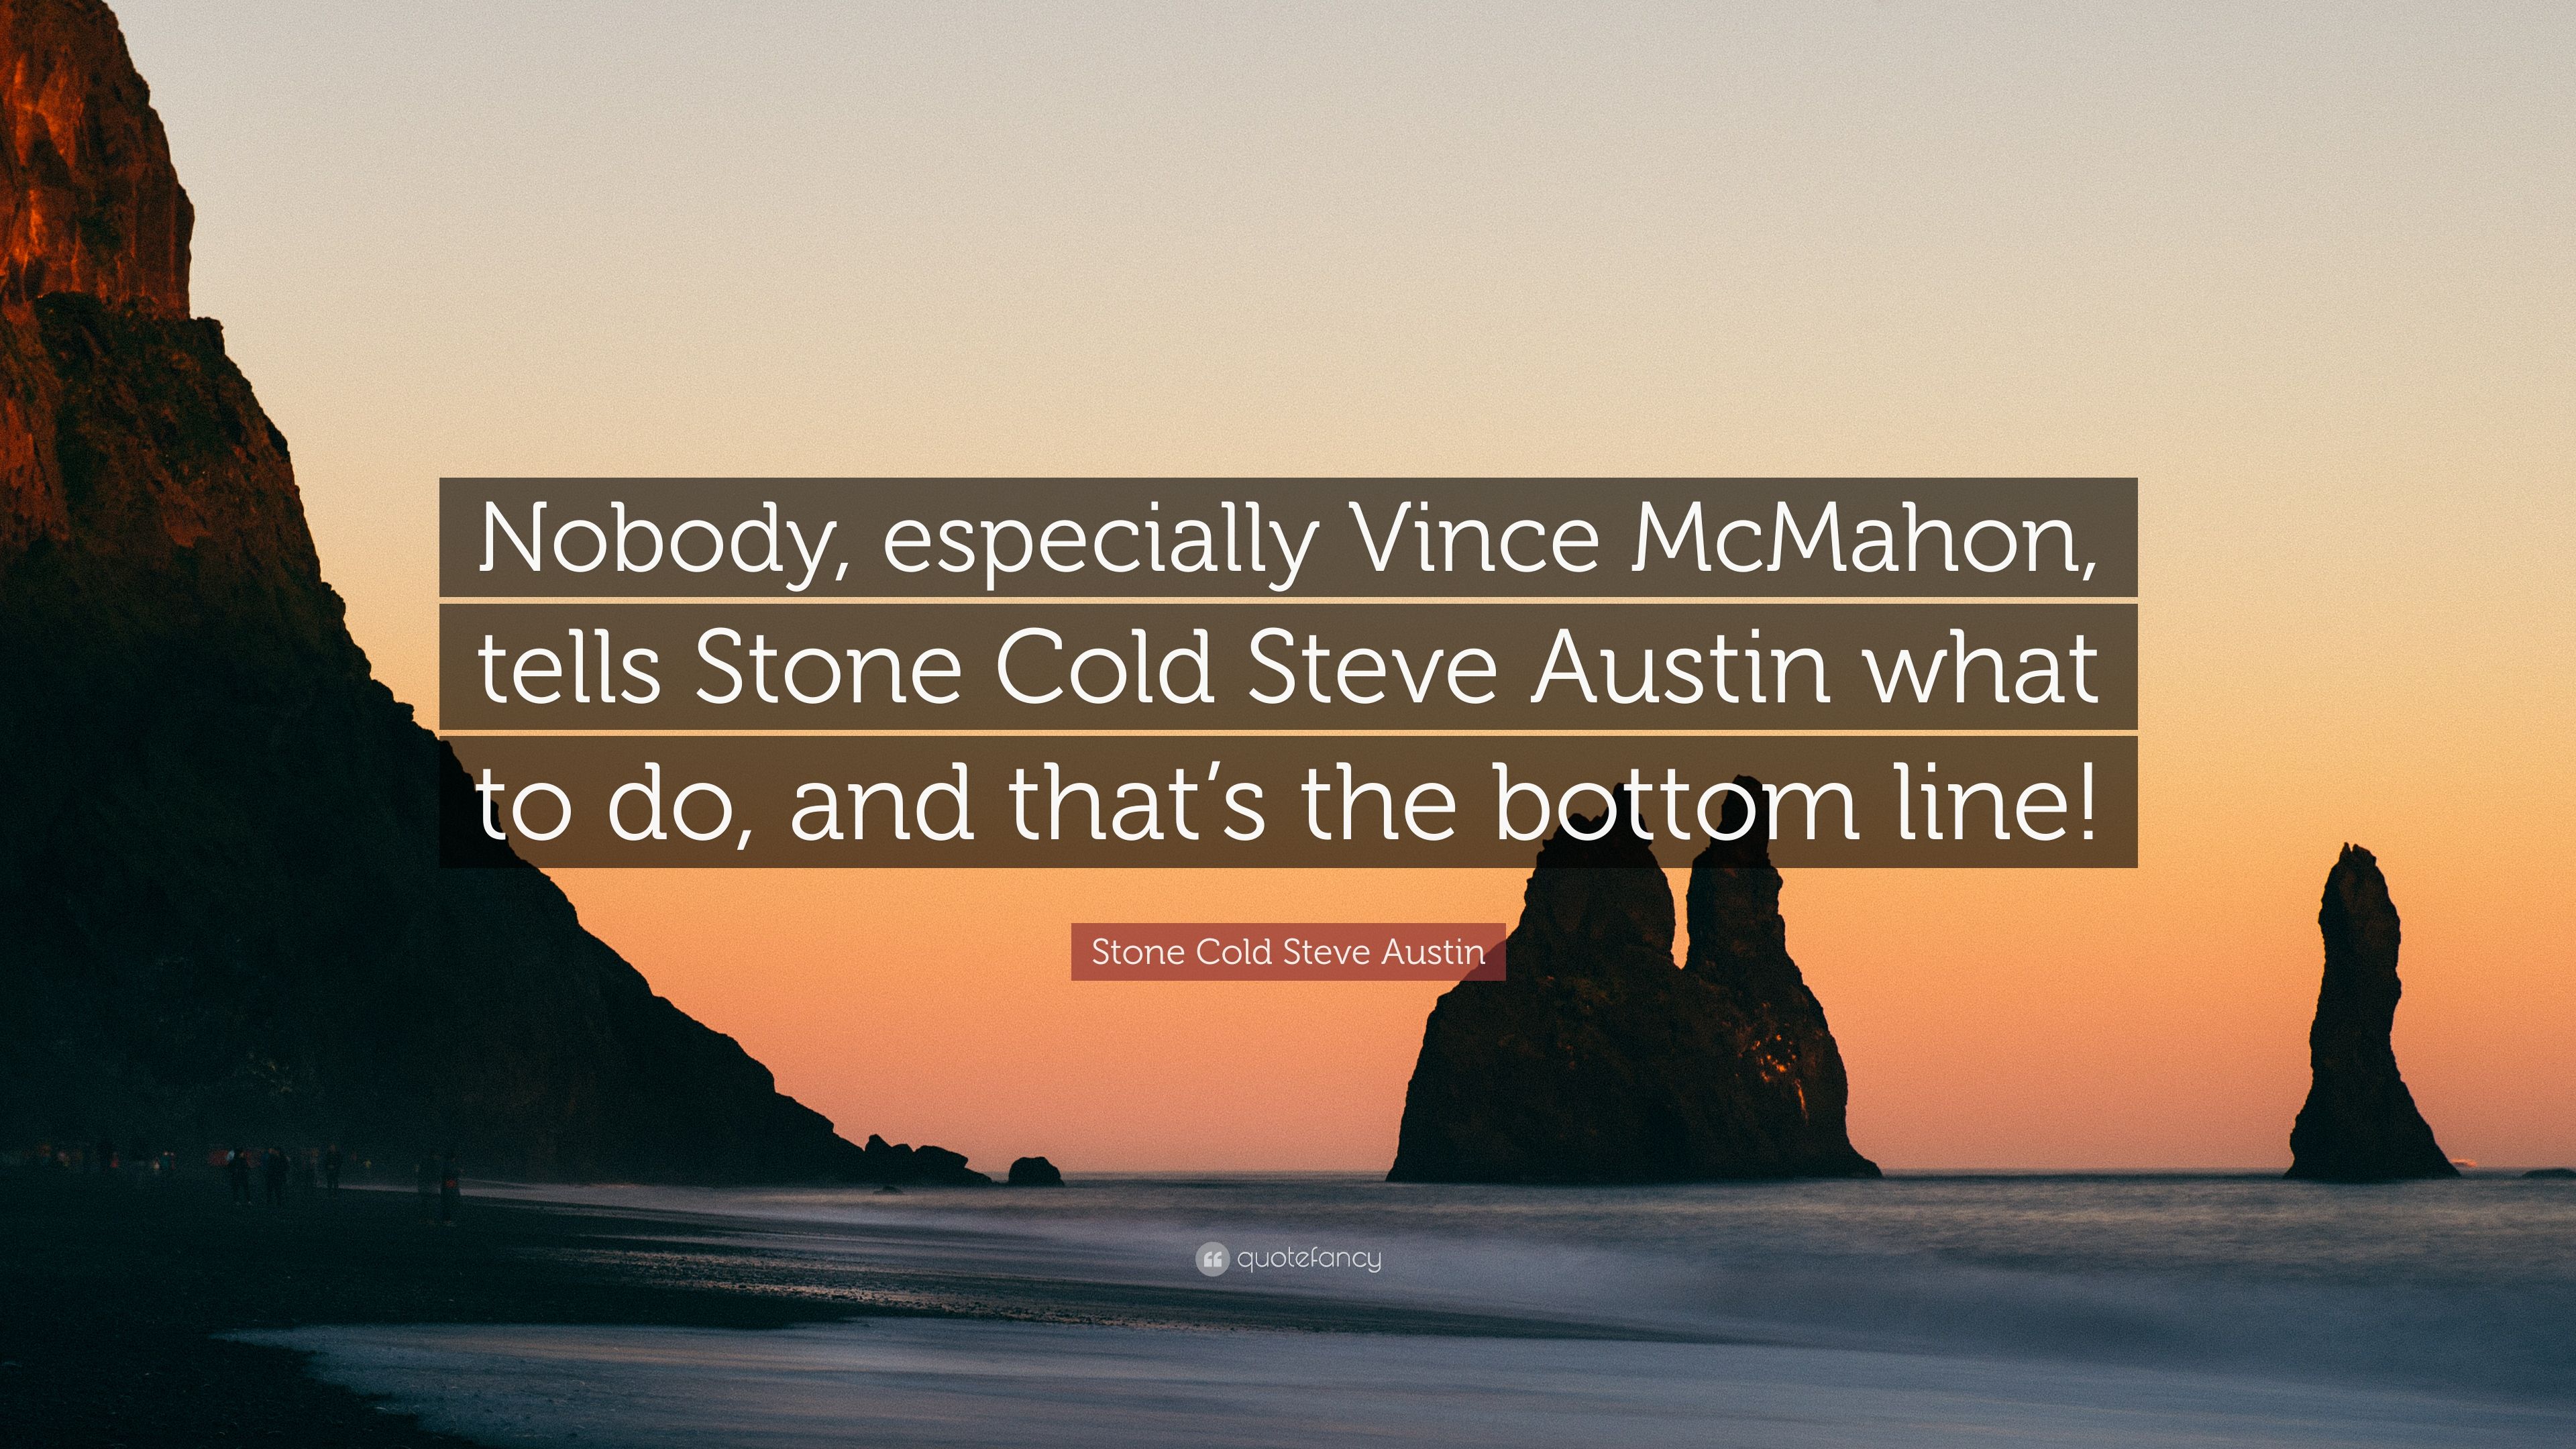 Stone Cold Steve Austin Quote: “Nobody, especially Vince McMahon